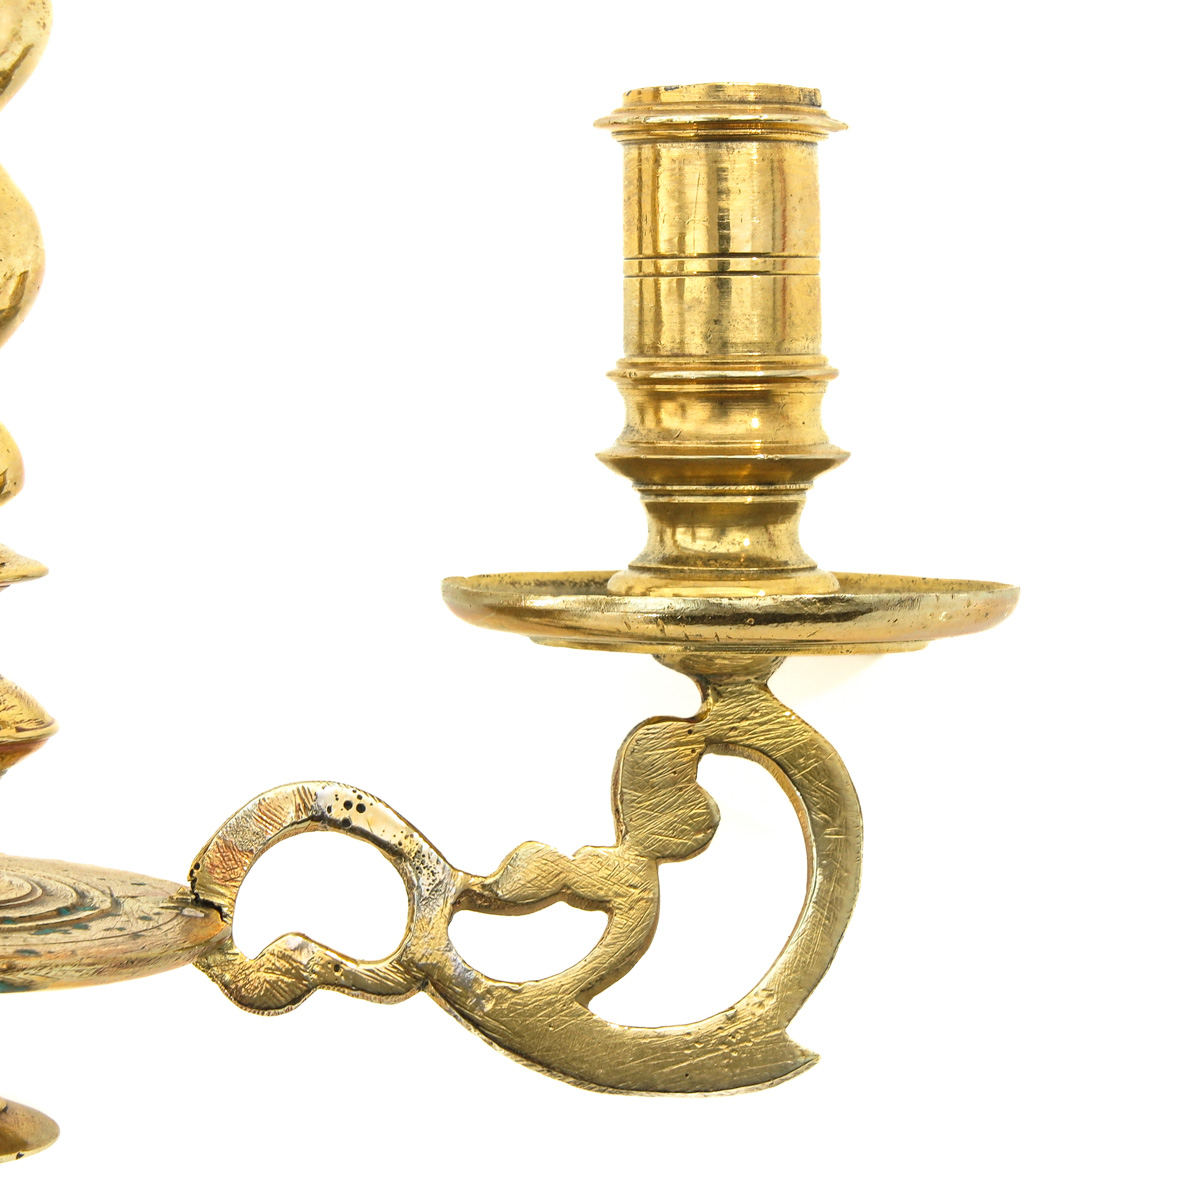 A Pair of 17th Century Candle Chandeliers - Image 8 of 8